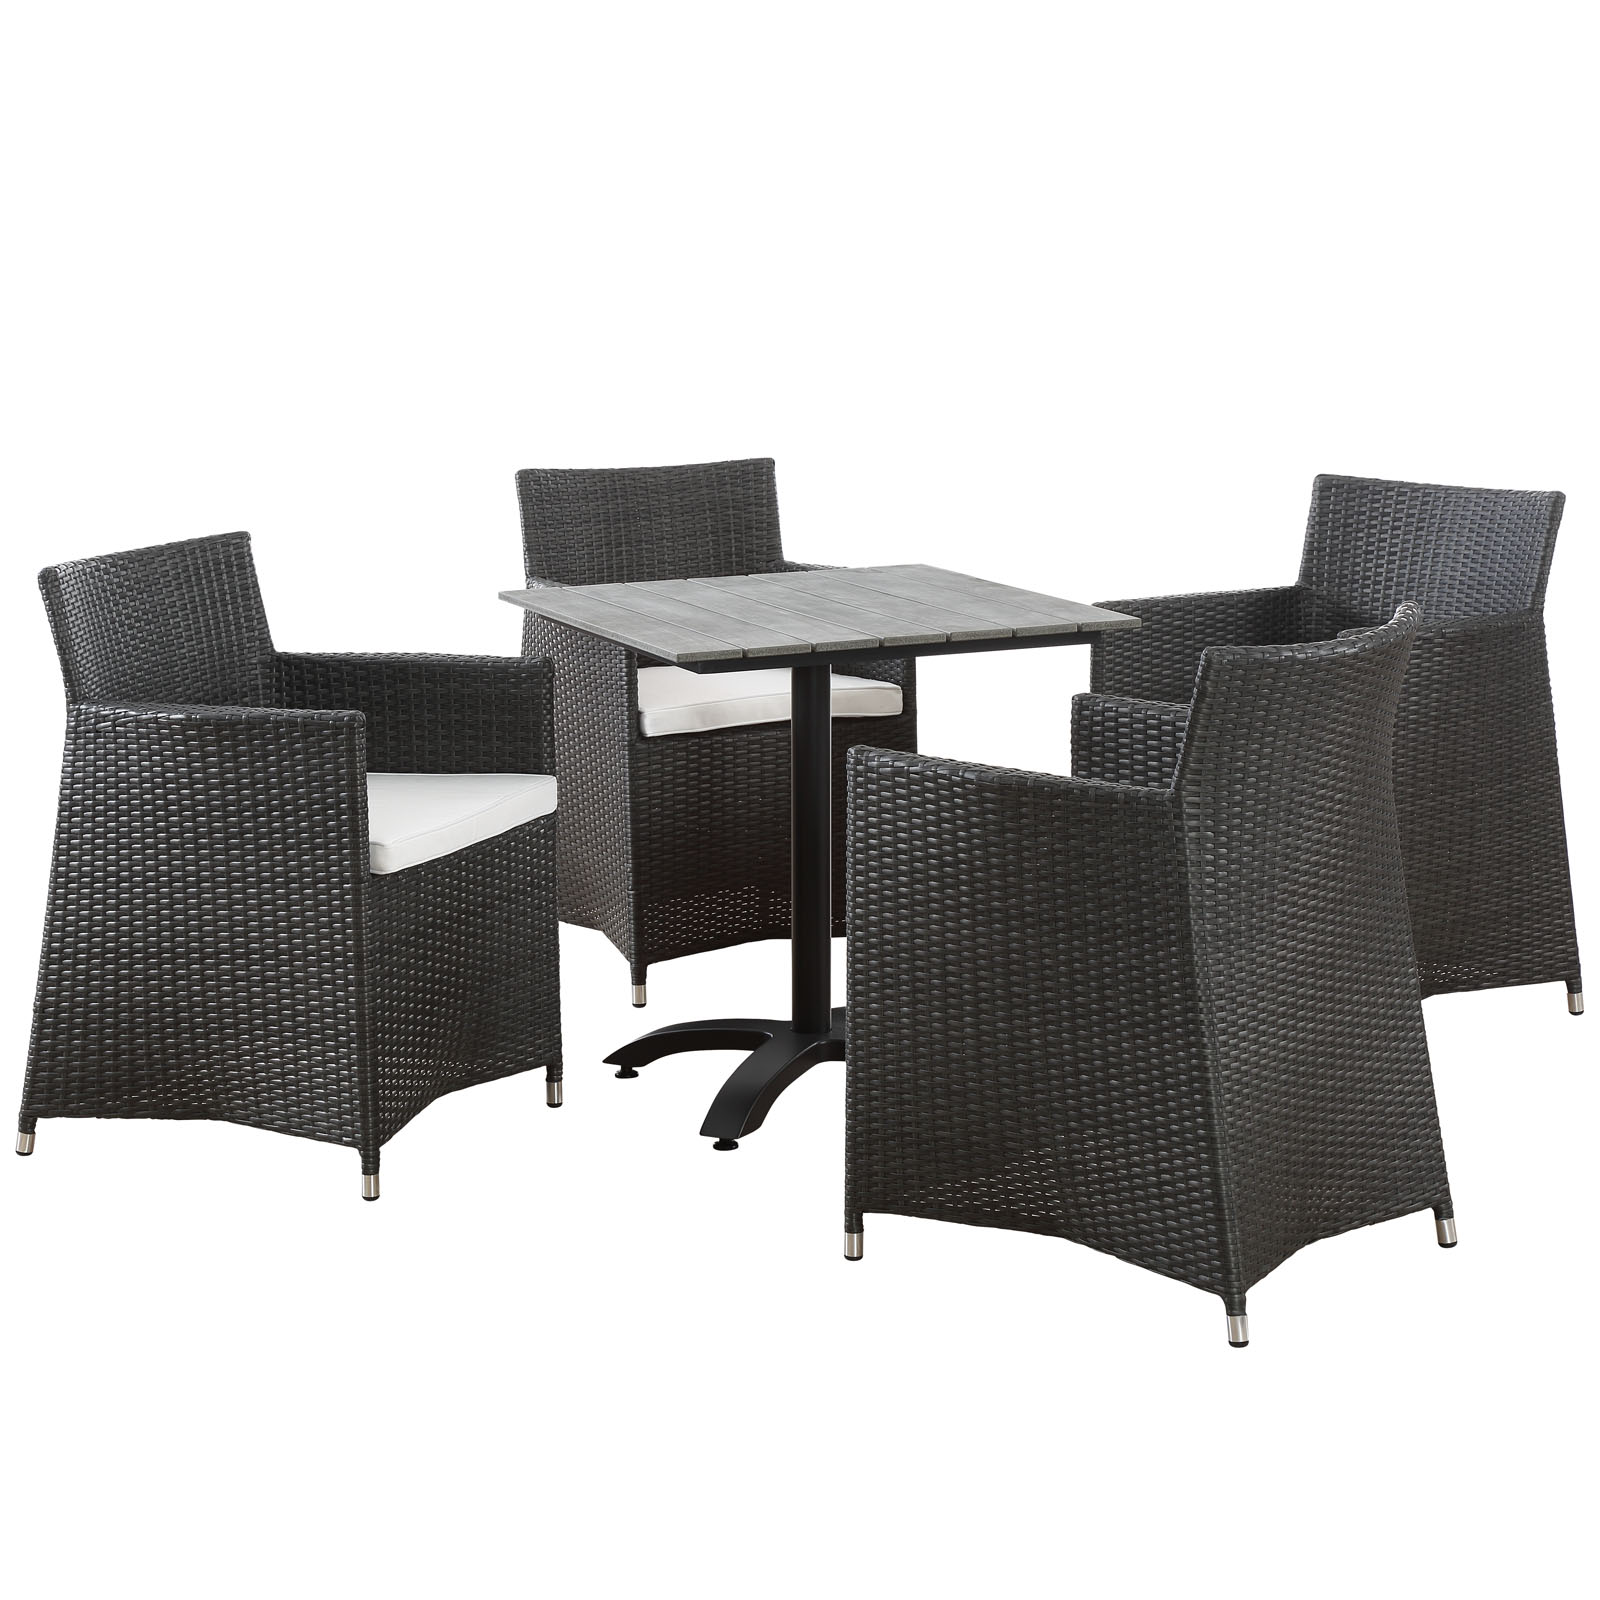 Modway Junction 5 Piece Outdoor Patio Dining Set in Brown White - image 2 of 7